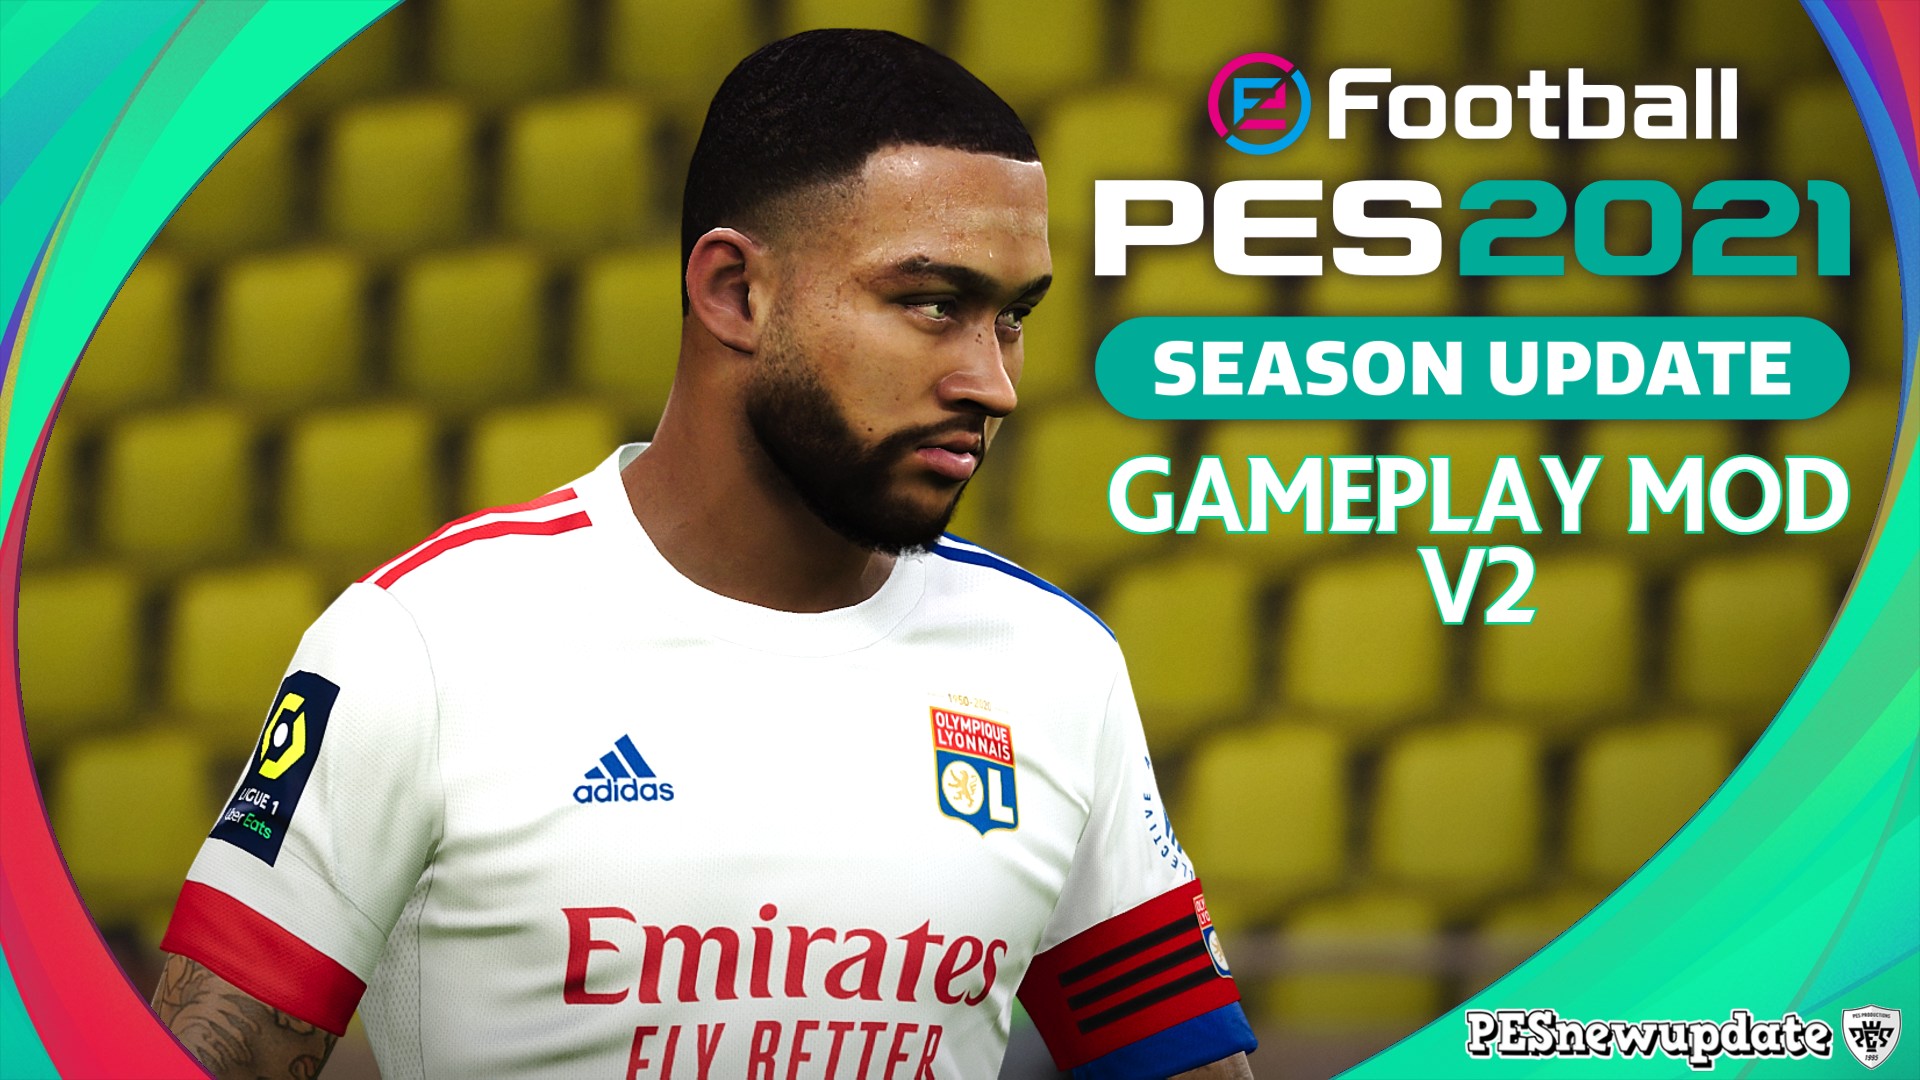 PES 2021 Gameplay Mod Live Football Match V2 by Holland ~ PESNewupdate Free Download Latest Pro Evolution Soccer Patch and Updates